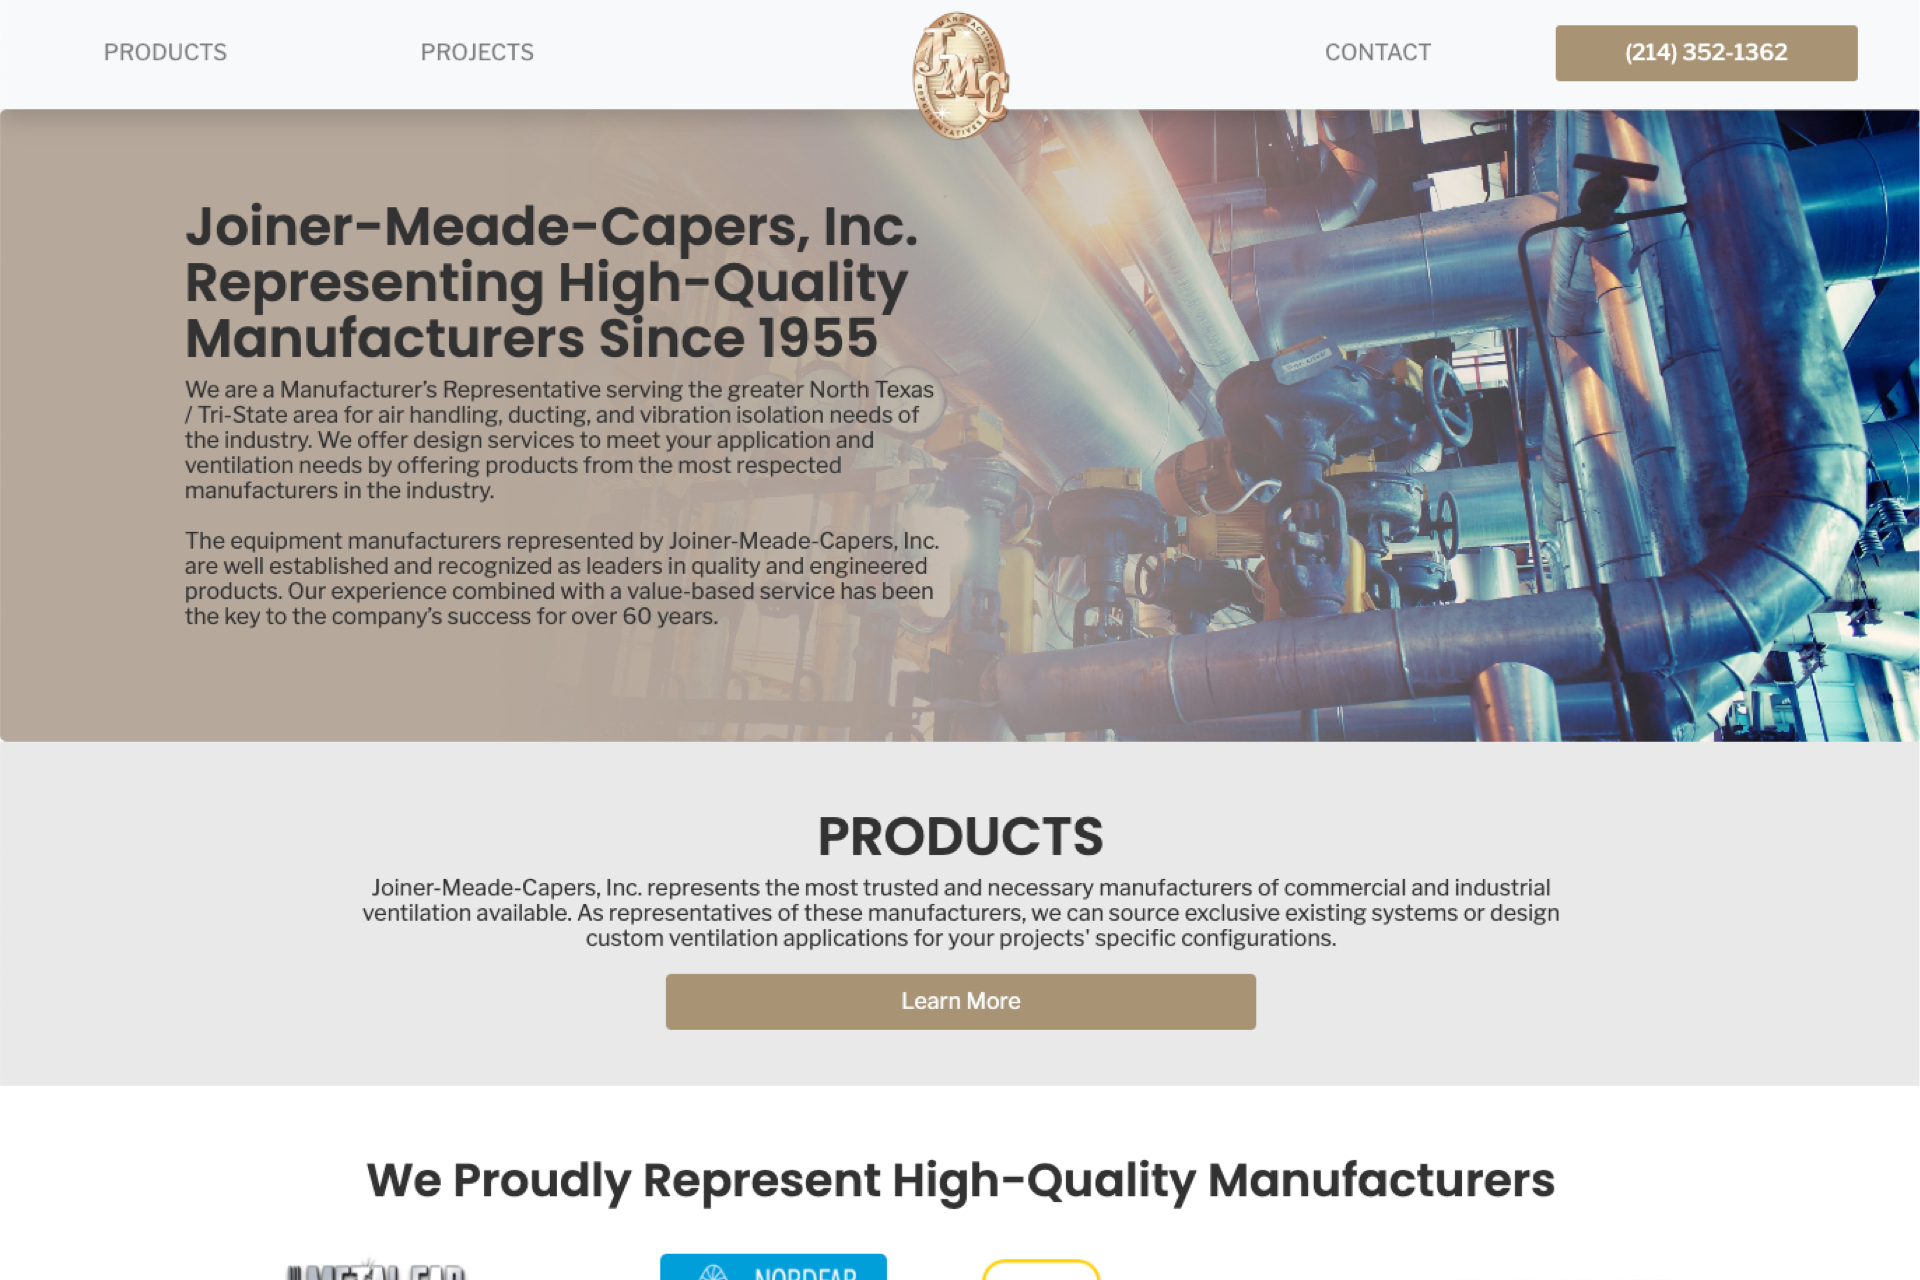 Joiner-Meade-Capers, Inc.